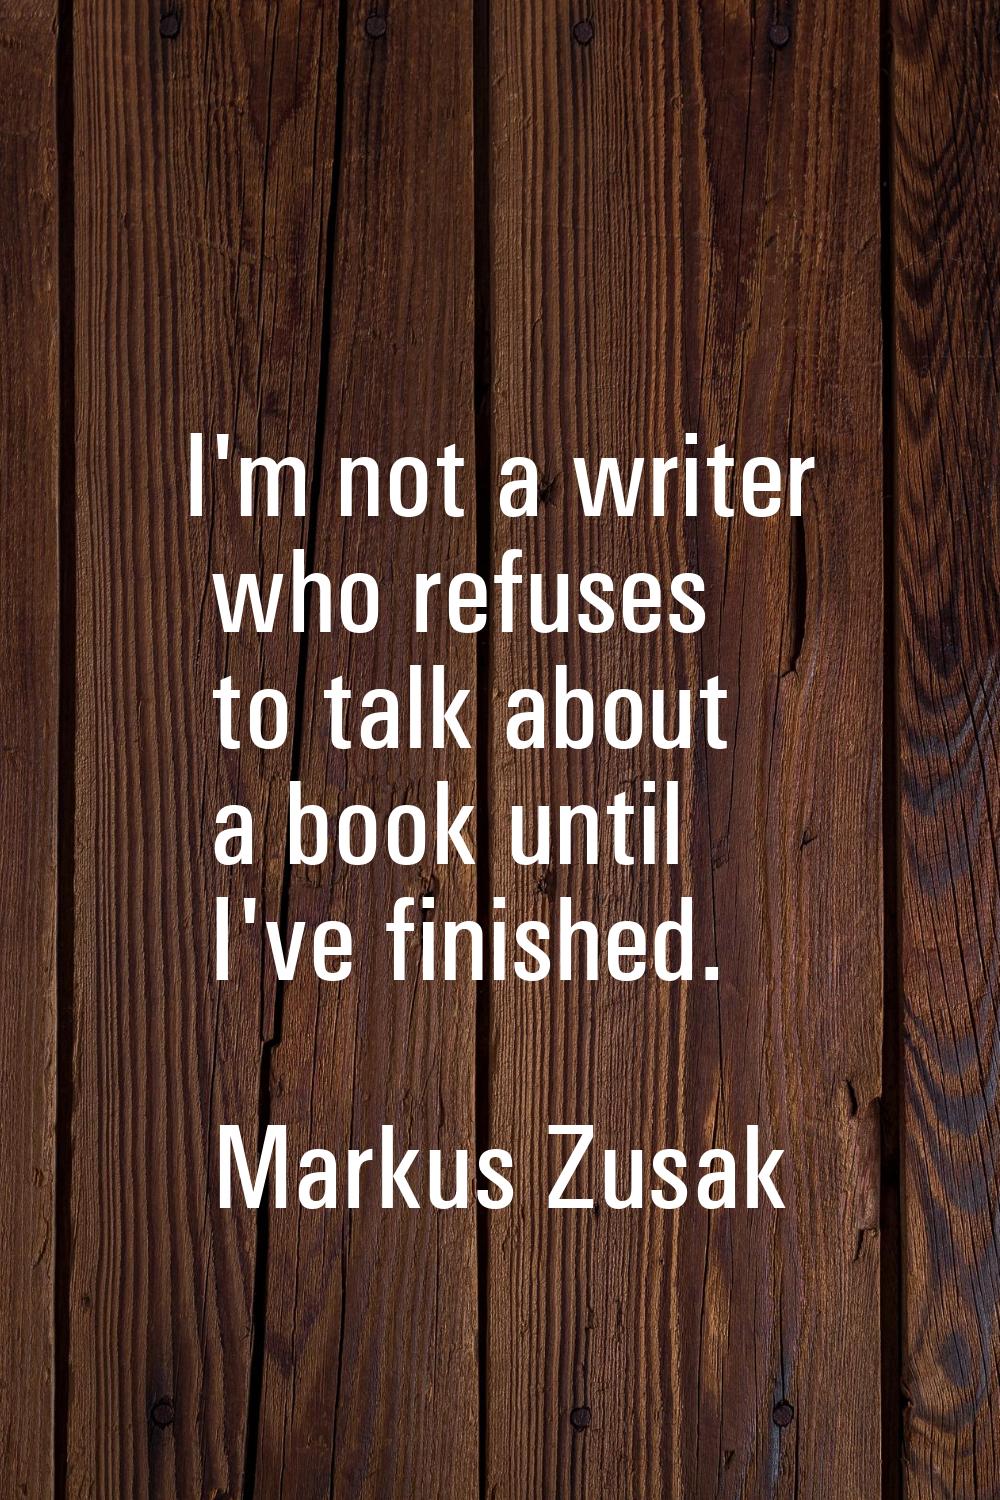 I'm not a writer who refuses to talk about a book until I've finished.